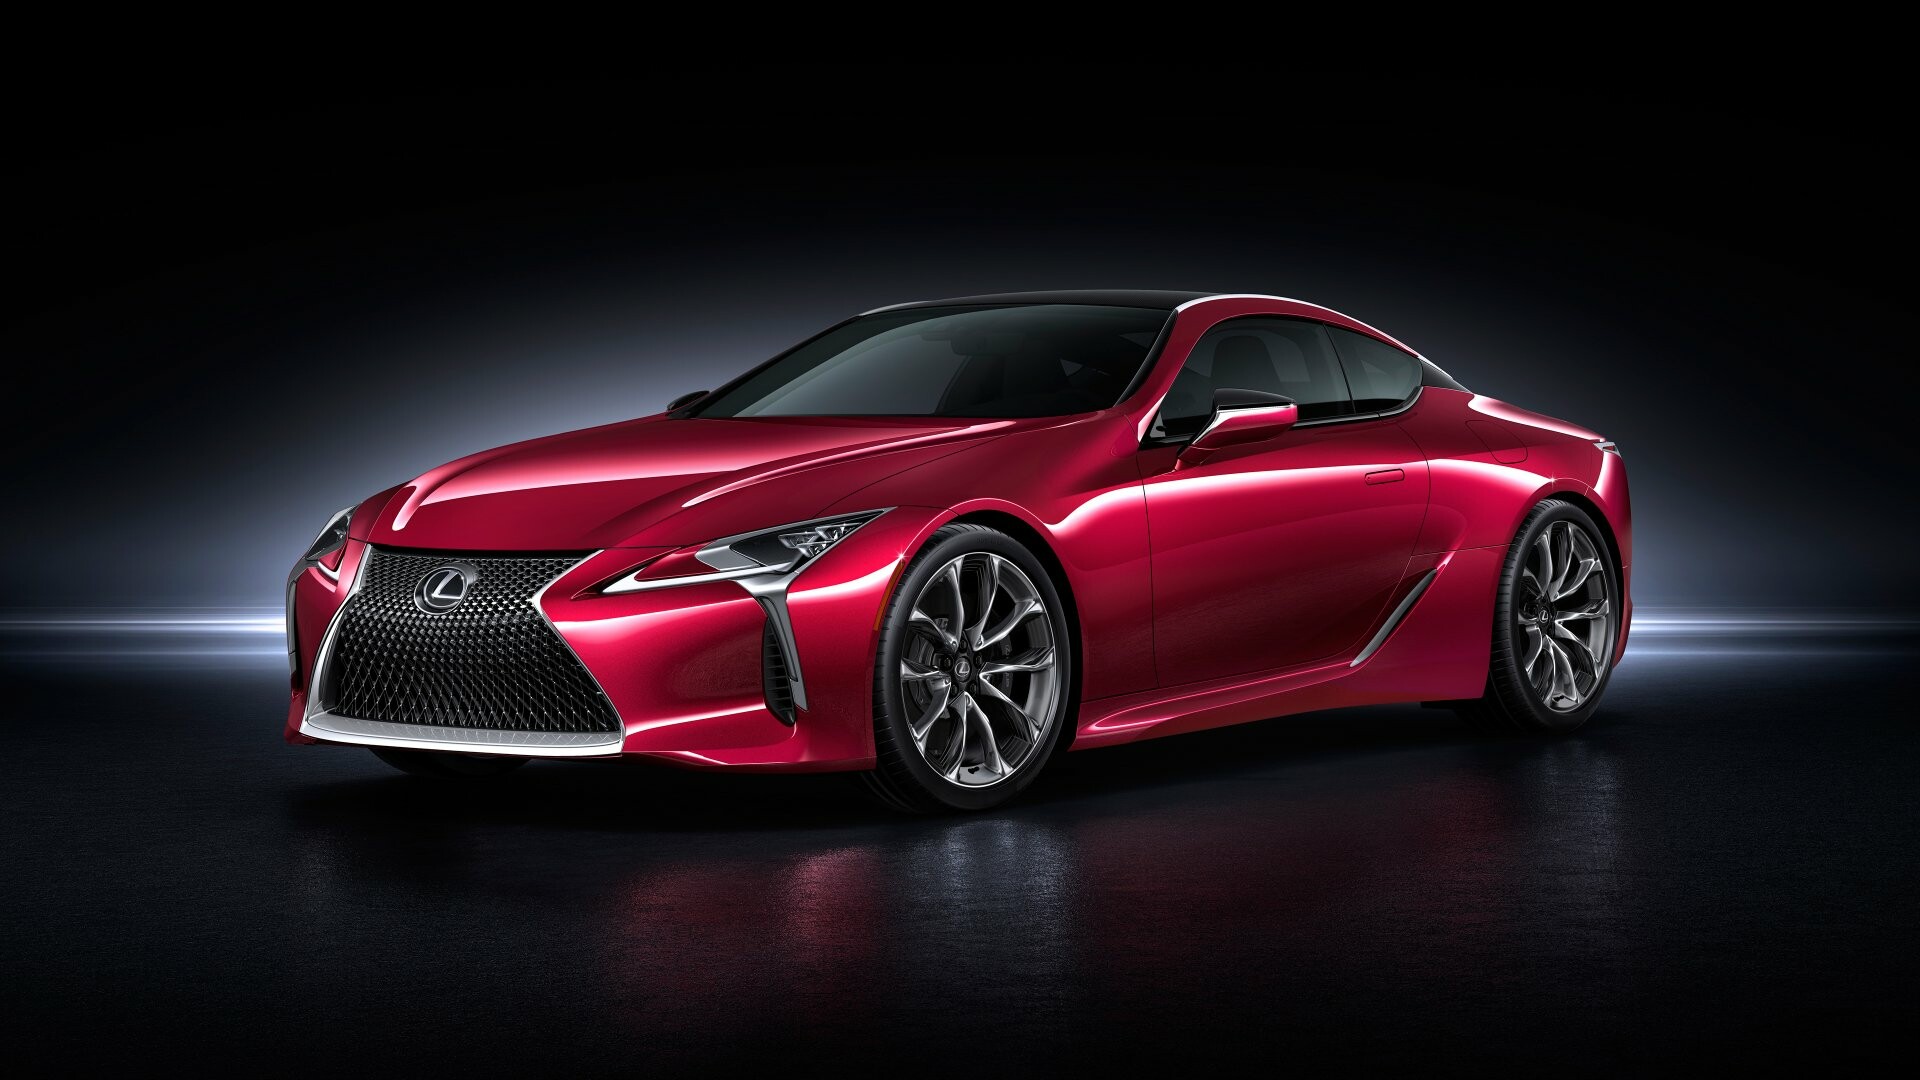 Lexus: Lexus's vehicles, Ranked as some of the most reliable cars, LC 500. 1920x1080 Full HD Wallpaper.